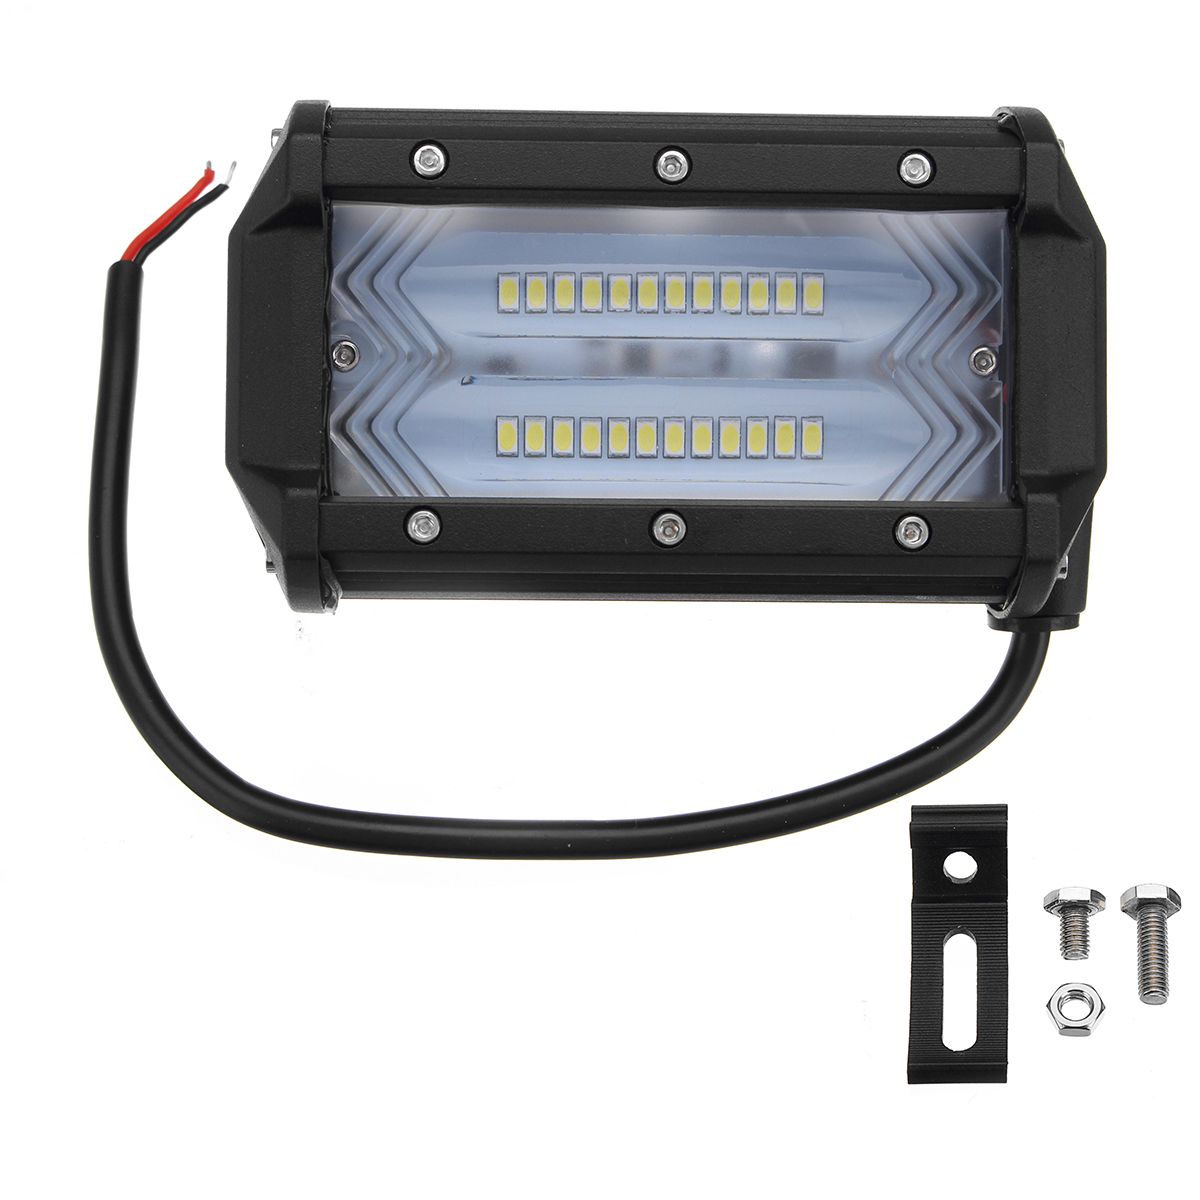 5Inch-Flood-LED-Work-Light-Bar-72W-1300LM-6000K-White-for-Off-Road-Tractor-4WD-SUV-1326940